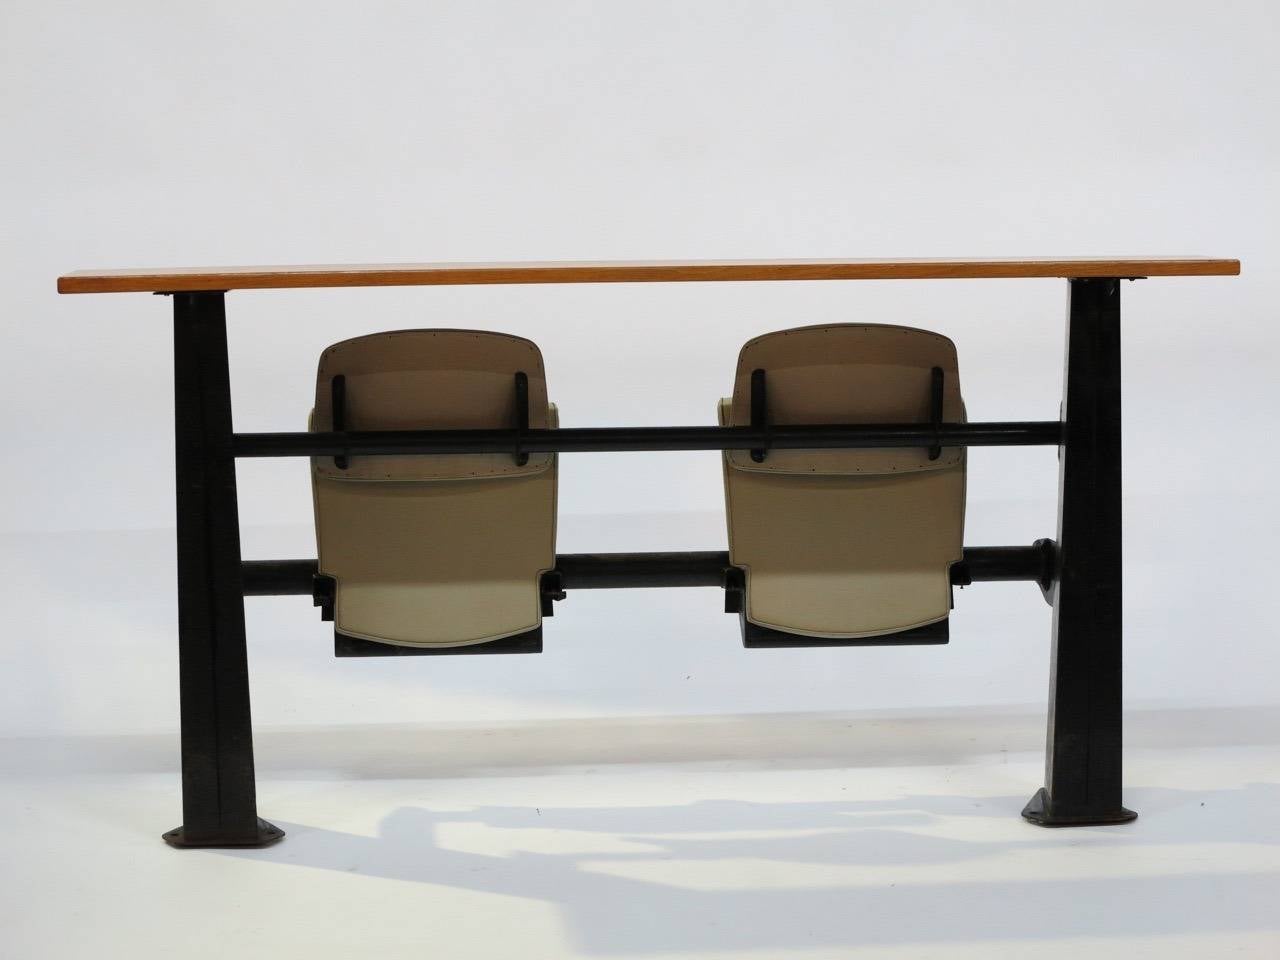 Jean Prouvé (1901-1984).

Lecture Hall bench, 
circa 1956.

Black lacquered bent steel sheet structure, supporting two standard seats with light grey leatherette upholstery.

Provenance : CEA Grenoble 1956.